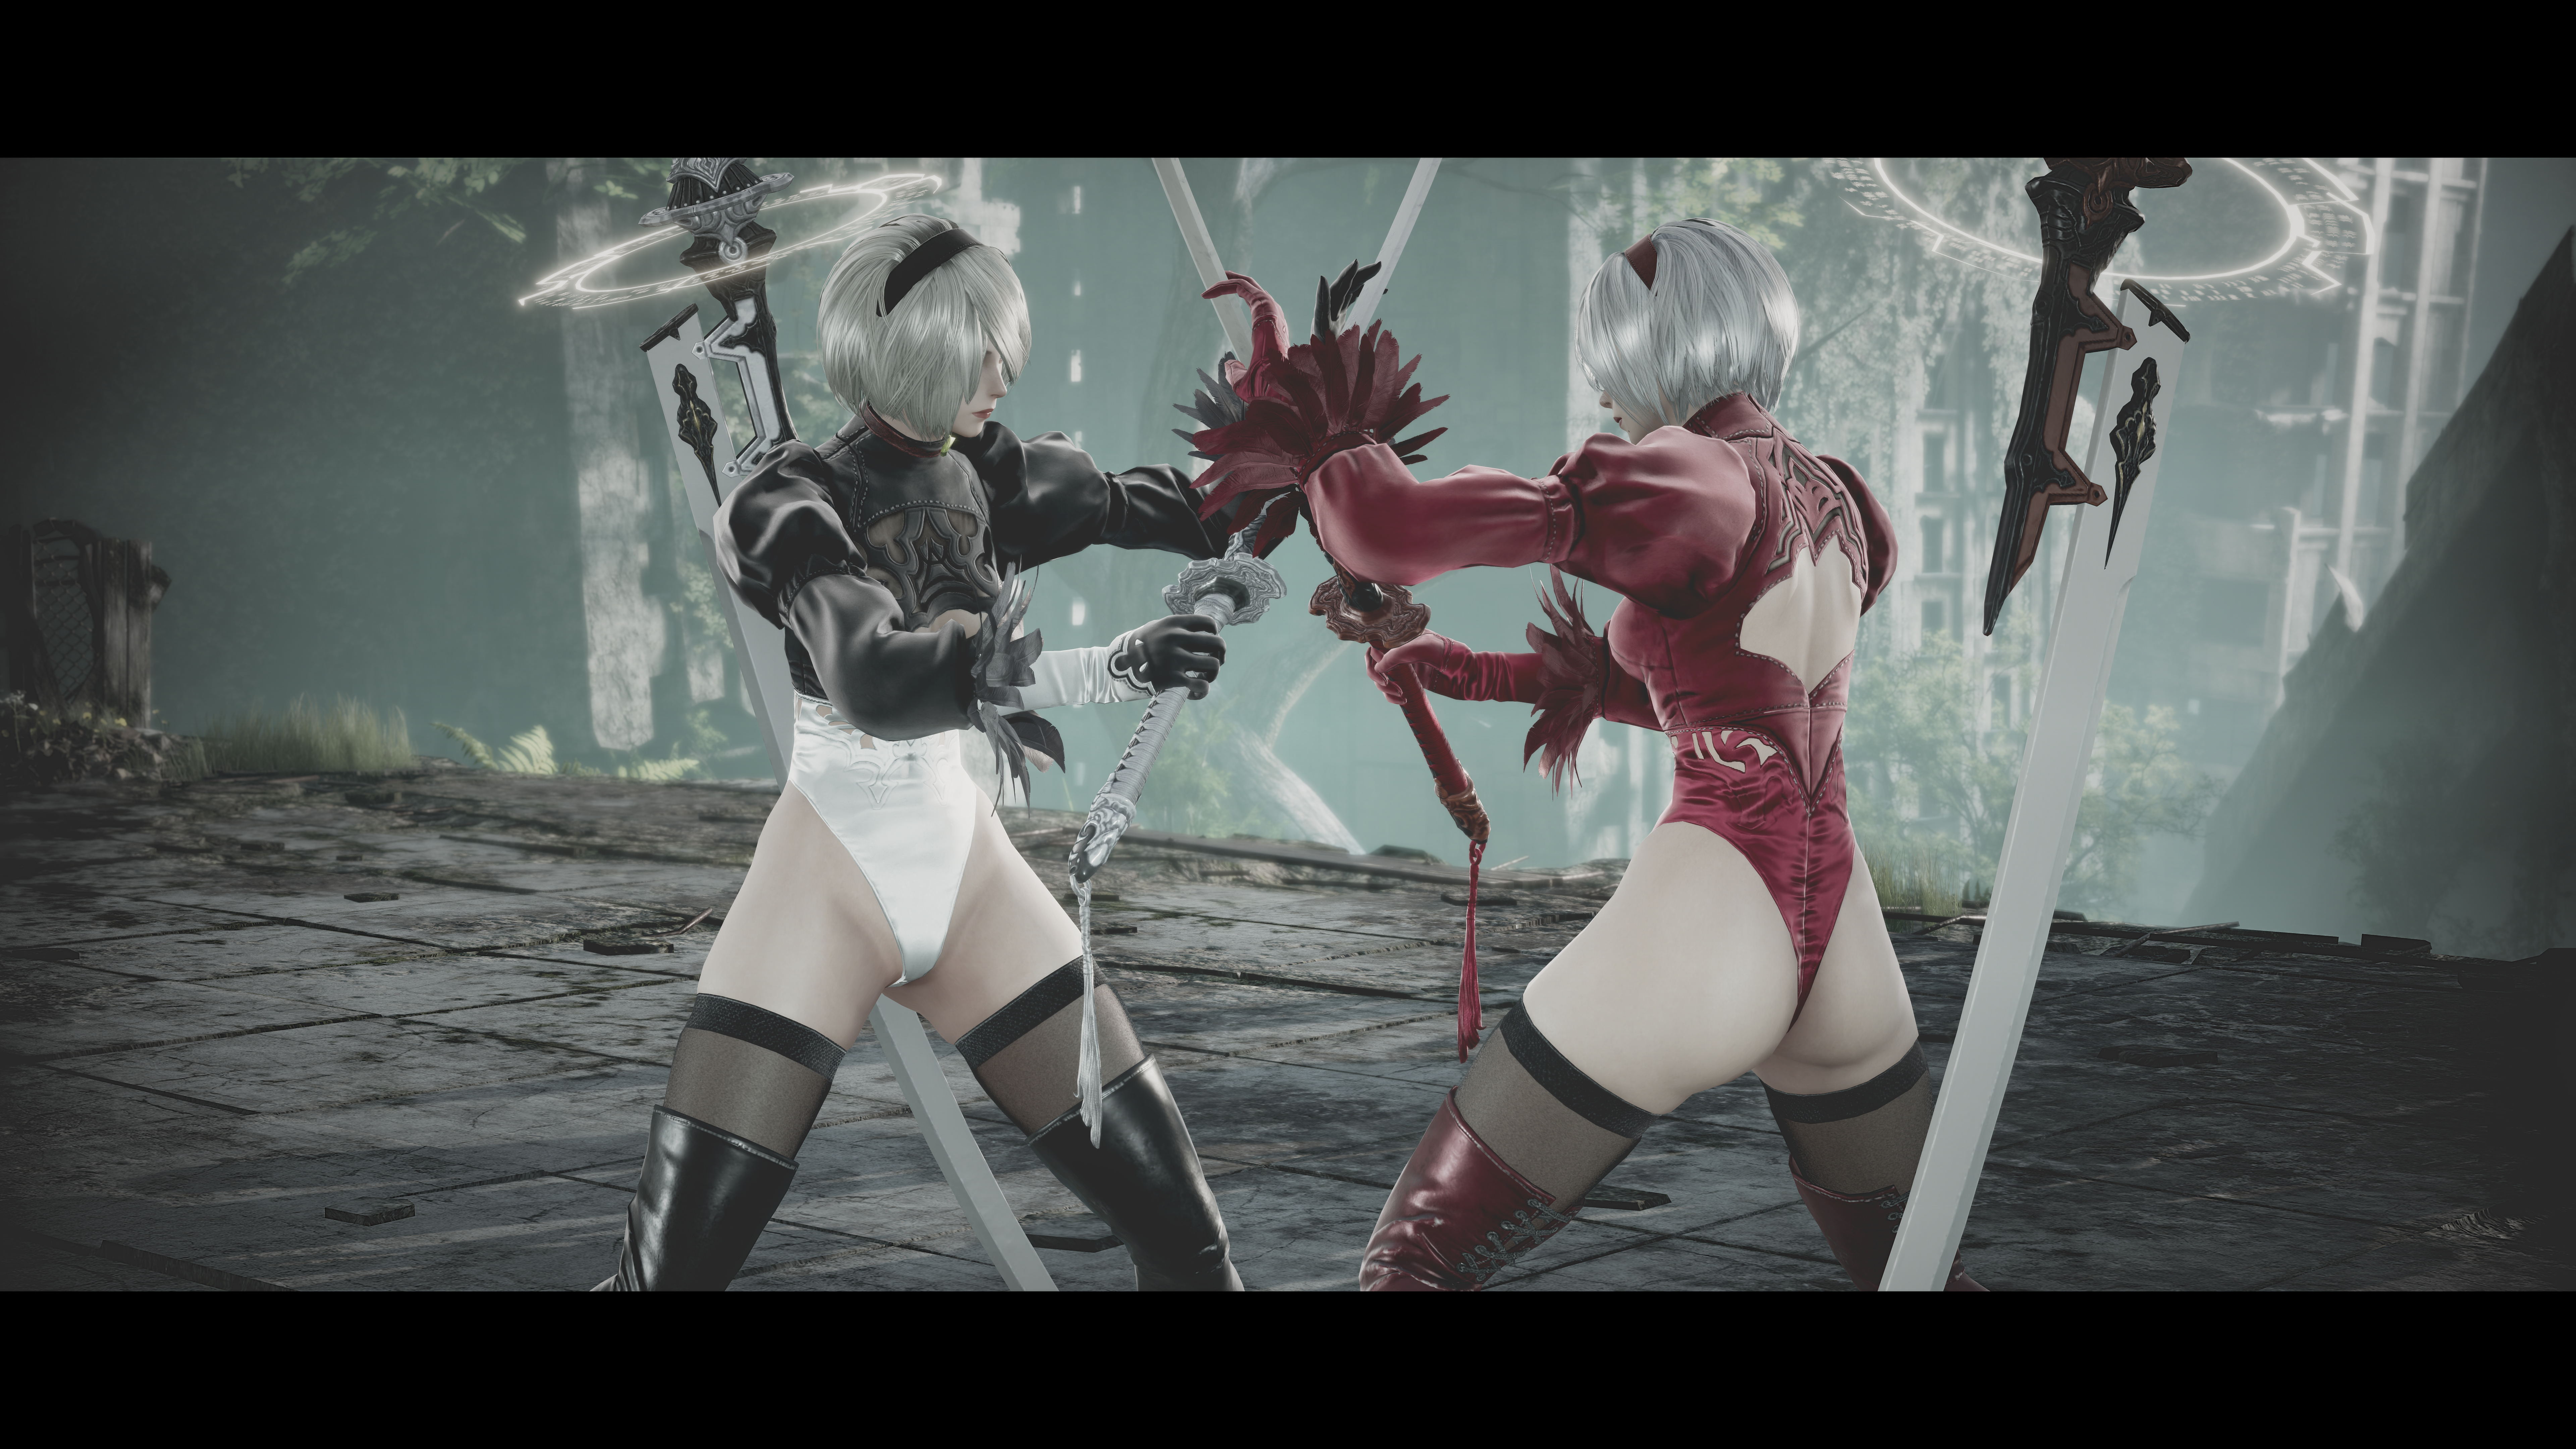 Anime 7680x4320 2B (Nier: Automata) Soul Calibur 6 boots thigh high boots women video games CGI video game girls video game characters